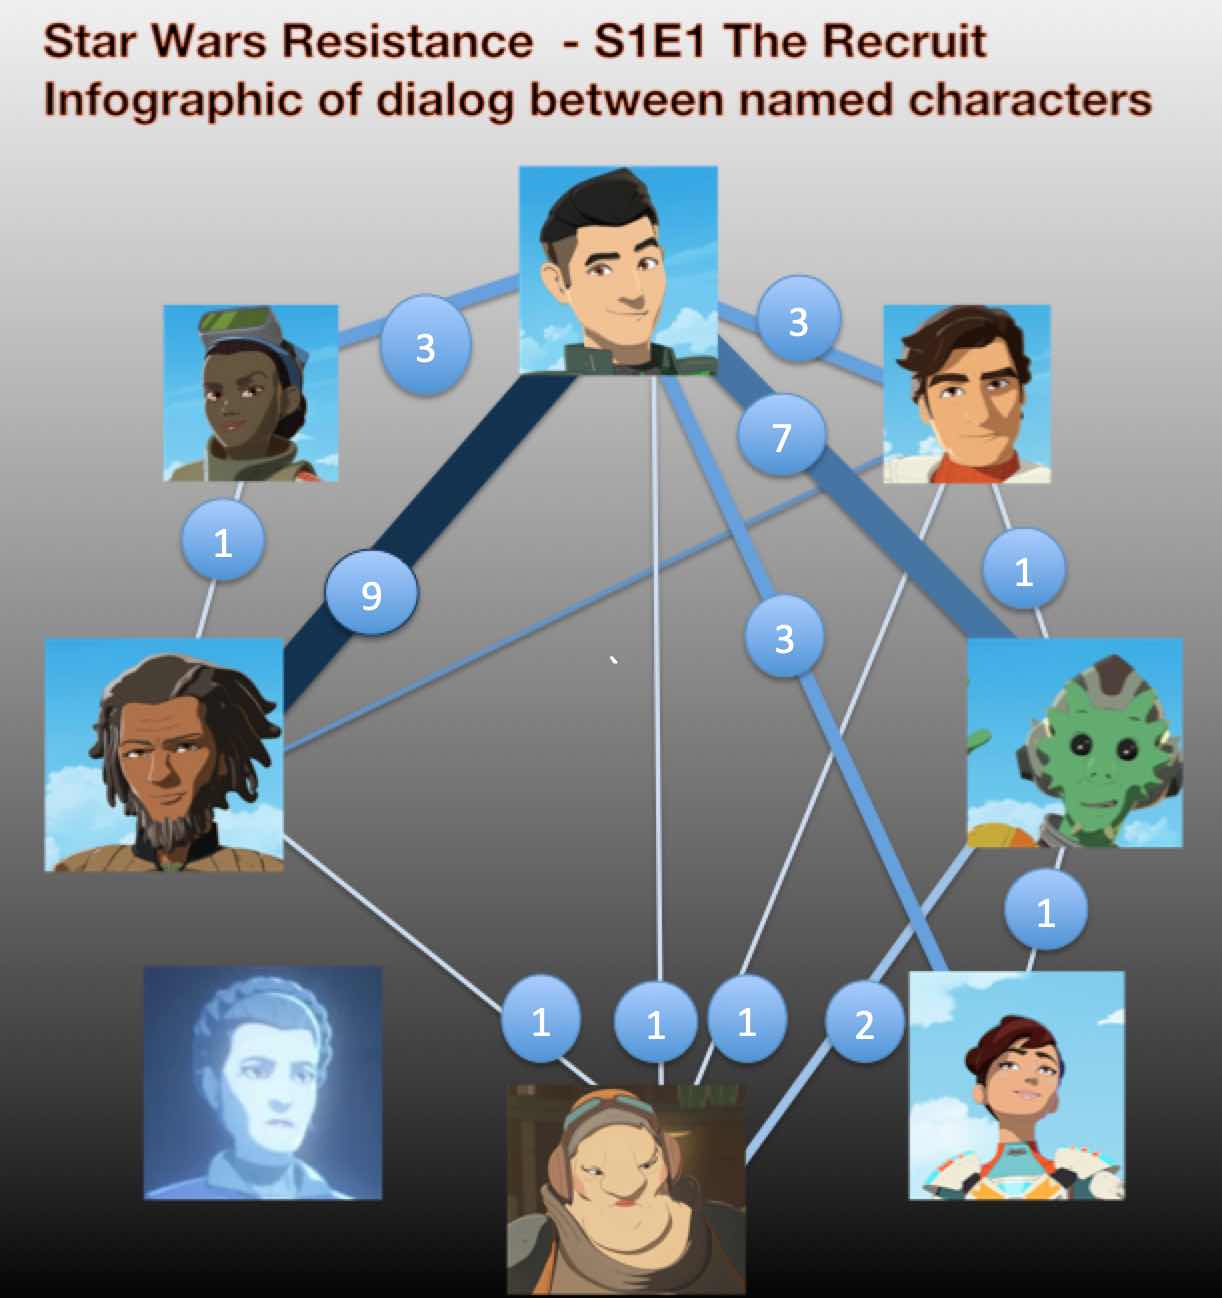 Star Wars Resistance - New Recruit Infographic